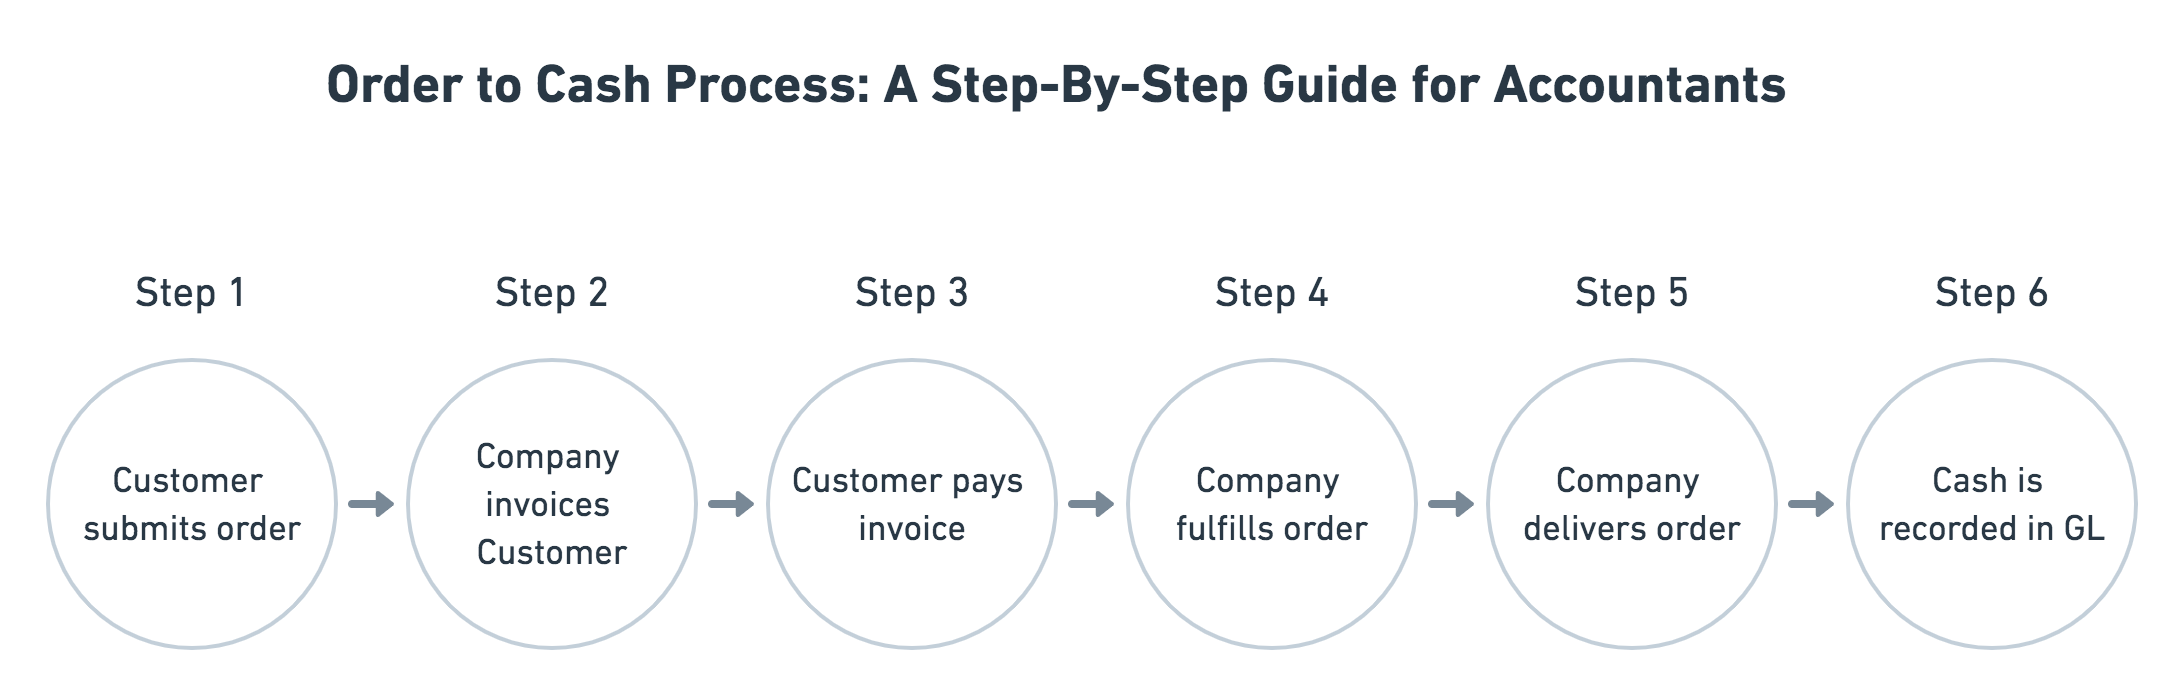 order to cash in 6 steps